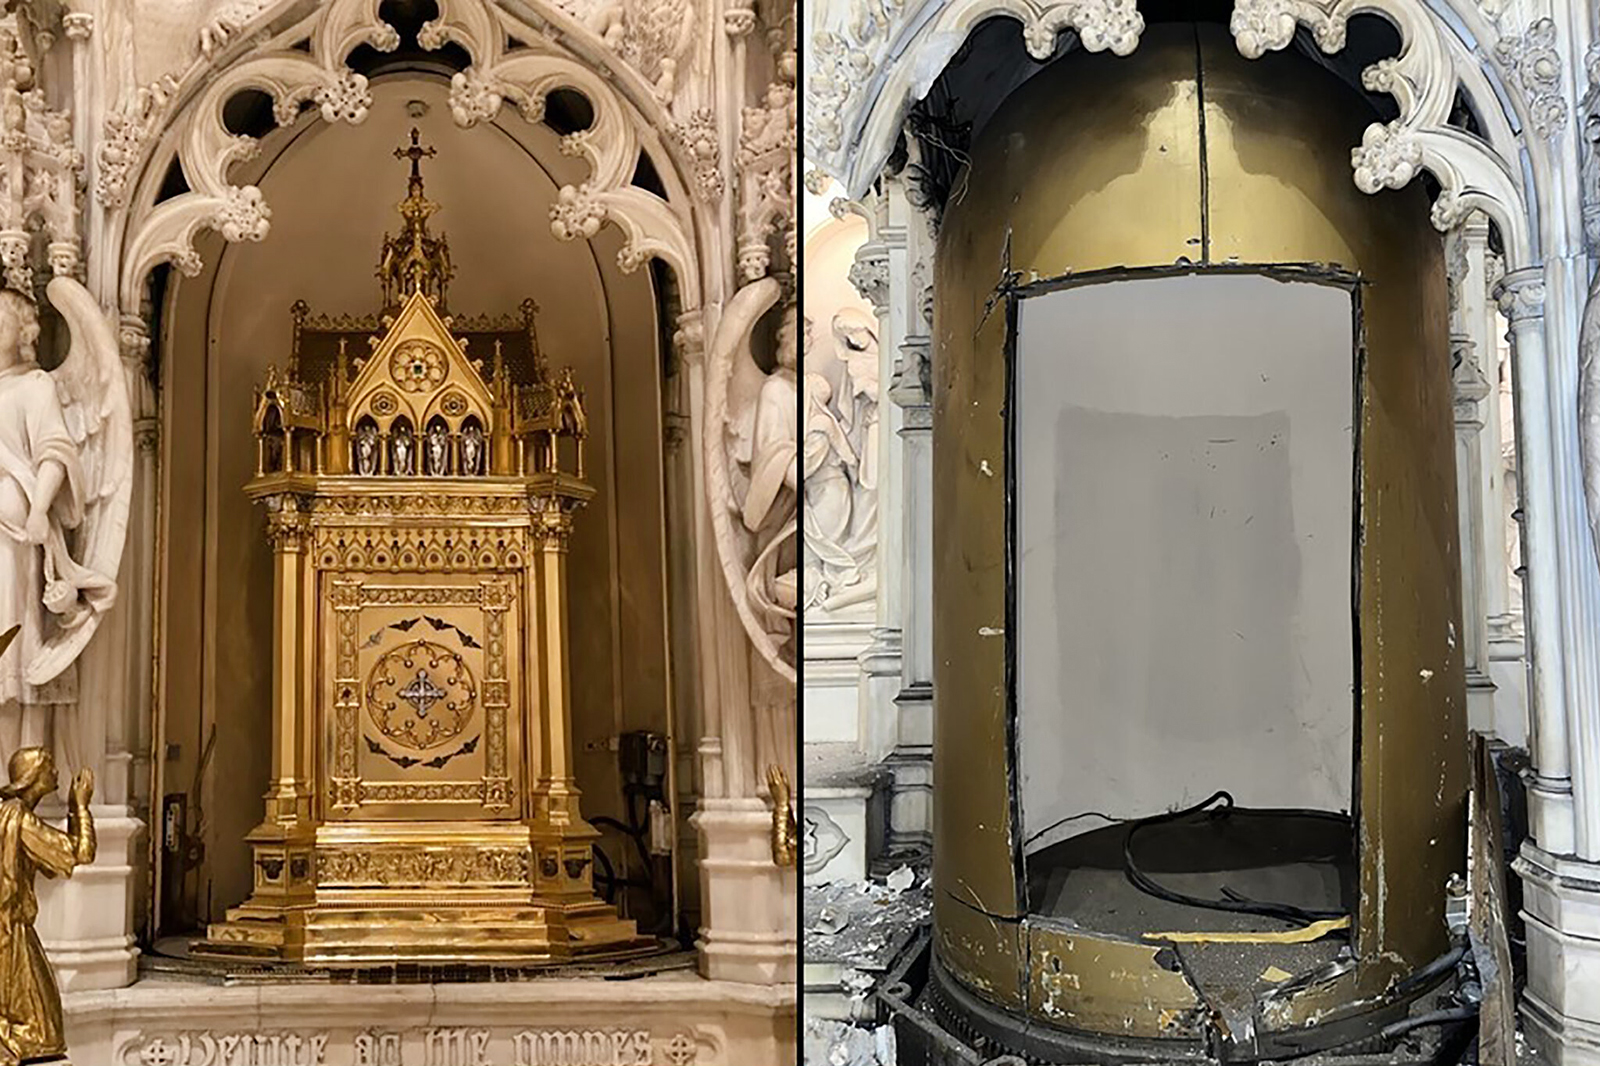 The tabernacle, left, before thieves removed it with power tools from St. Augustine Catholic Church in Brooklyn, New York. The solid 18-karat gold tabernacle is valued at around $2 million. Photos courtesy DeSales Media Group